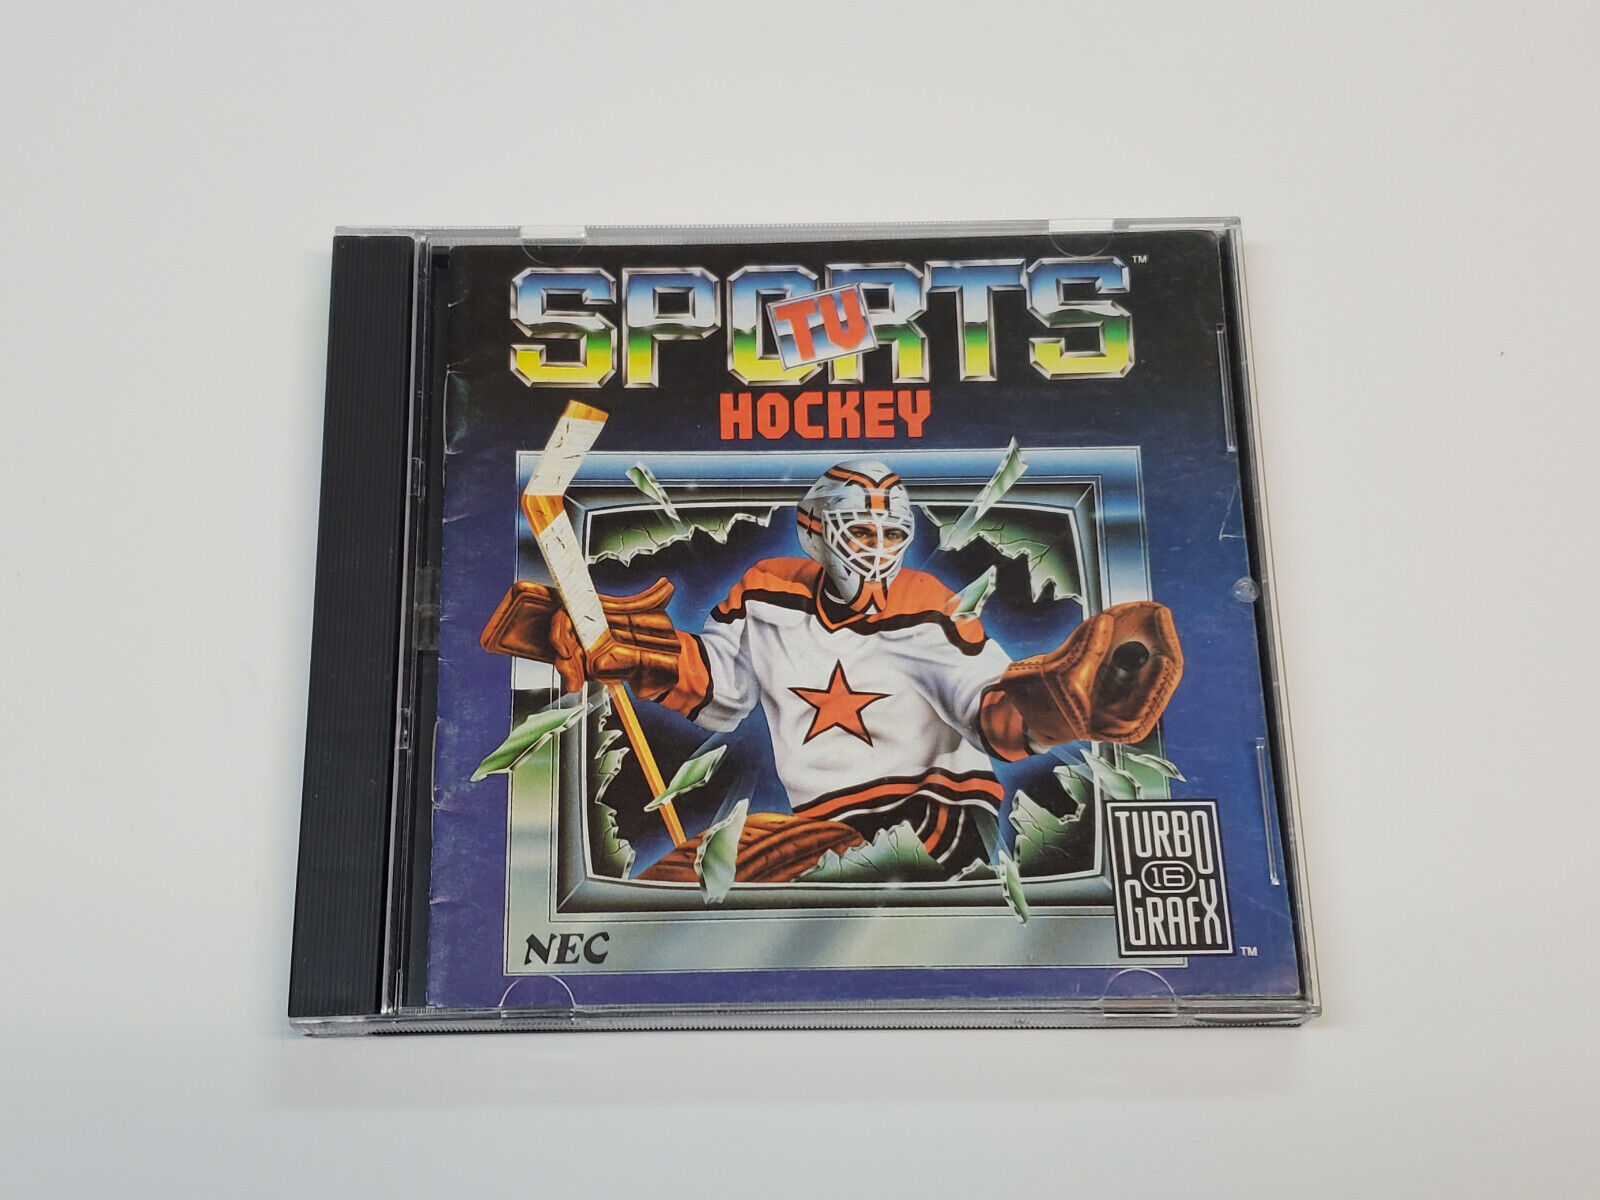 Sports TV Hockey Authentic Original TurboGrafx-16 Case & Manual Only